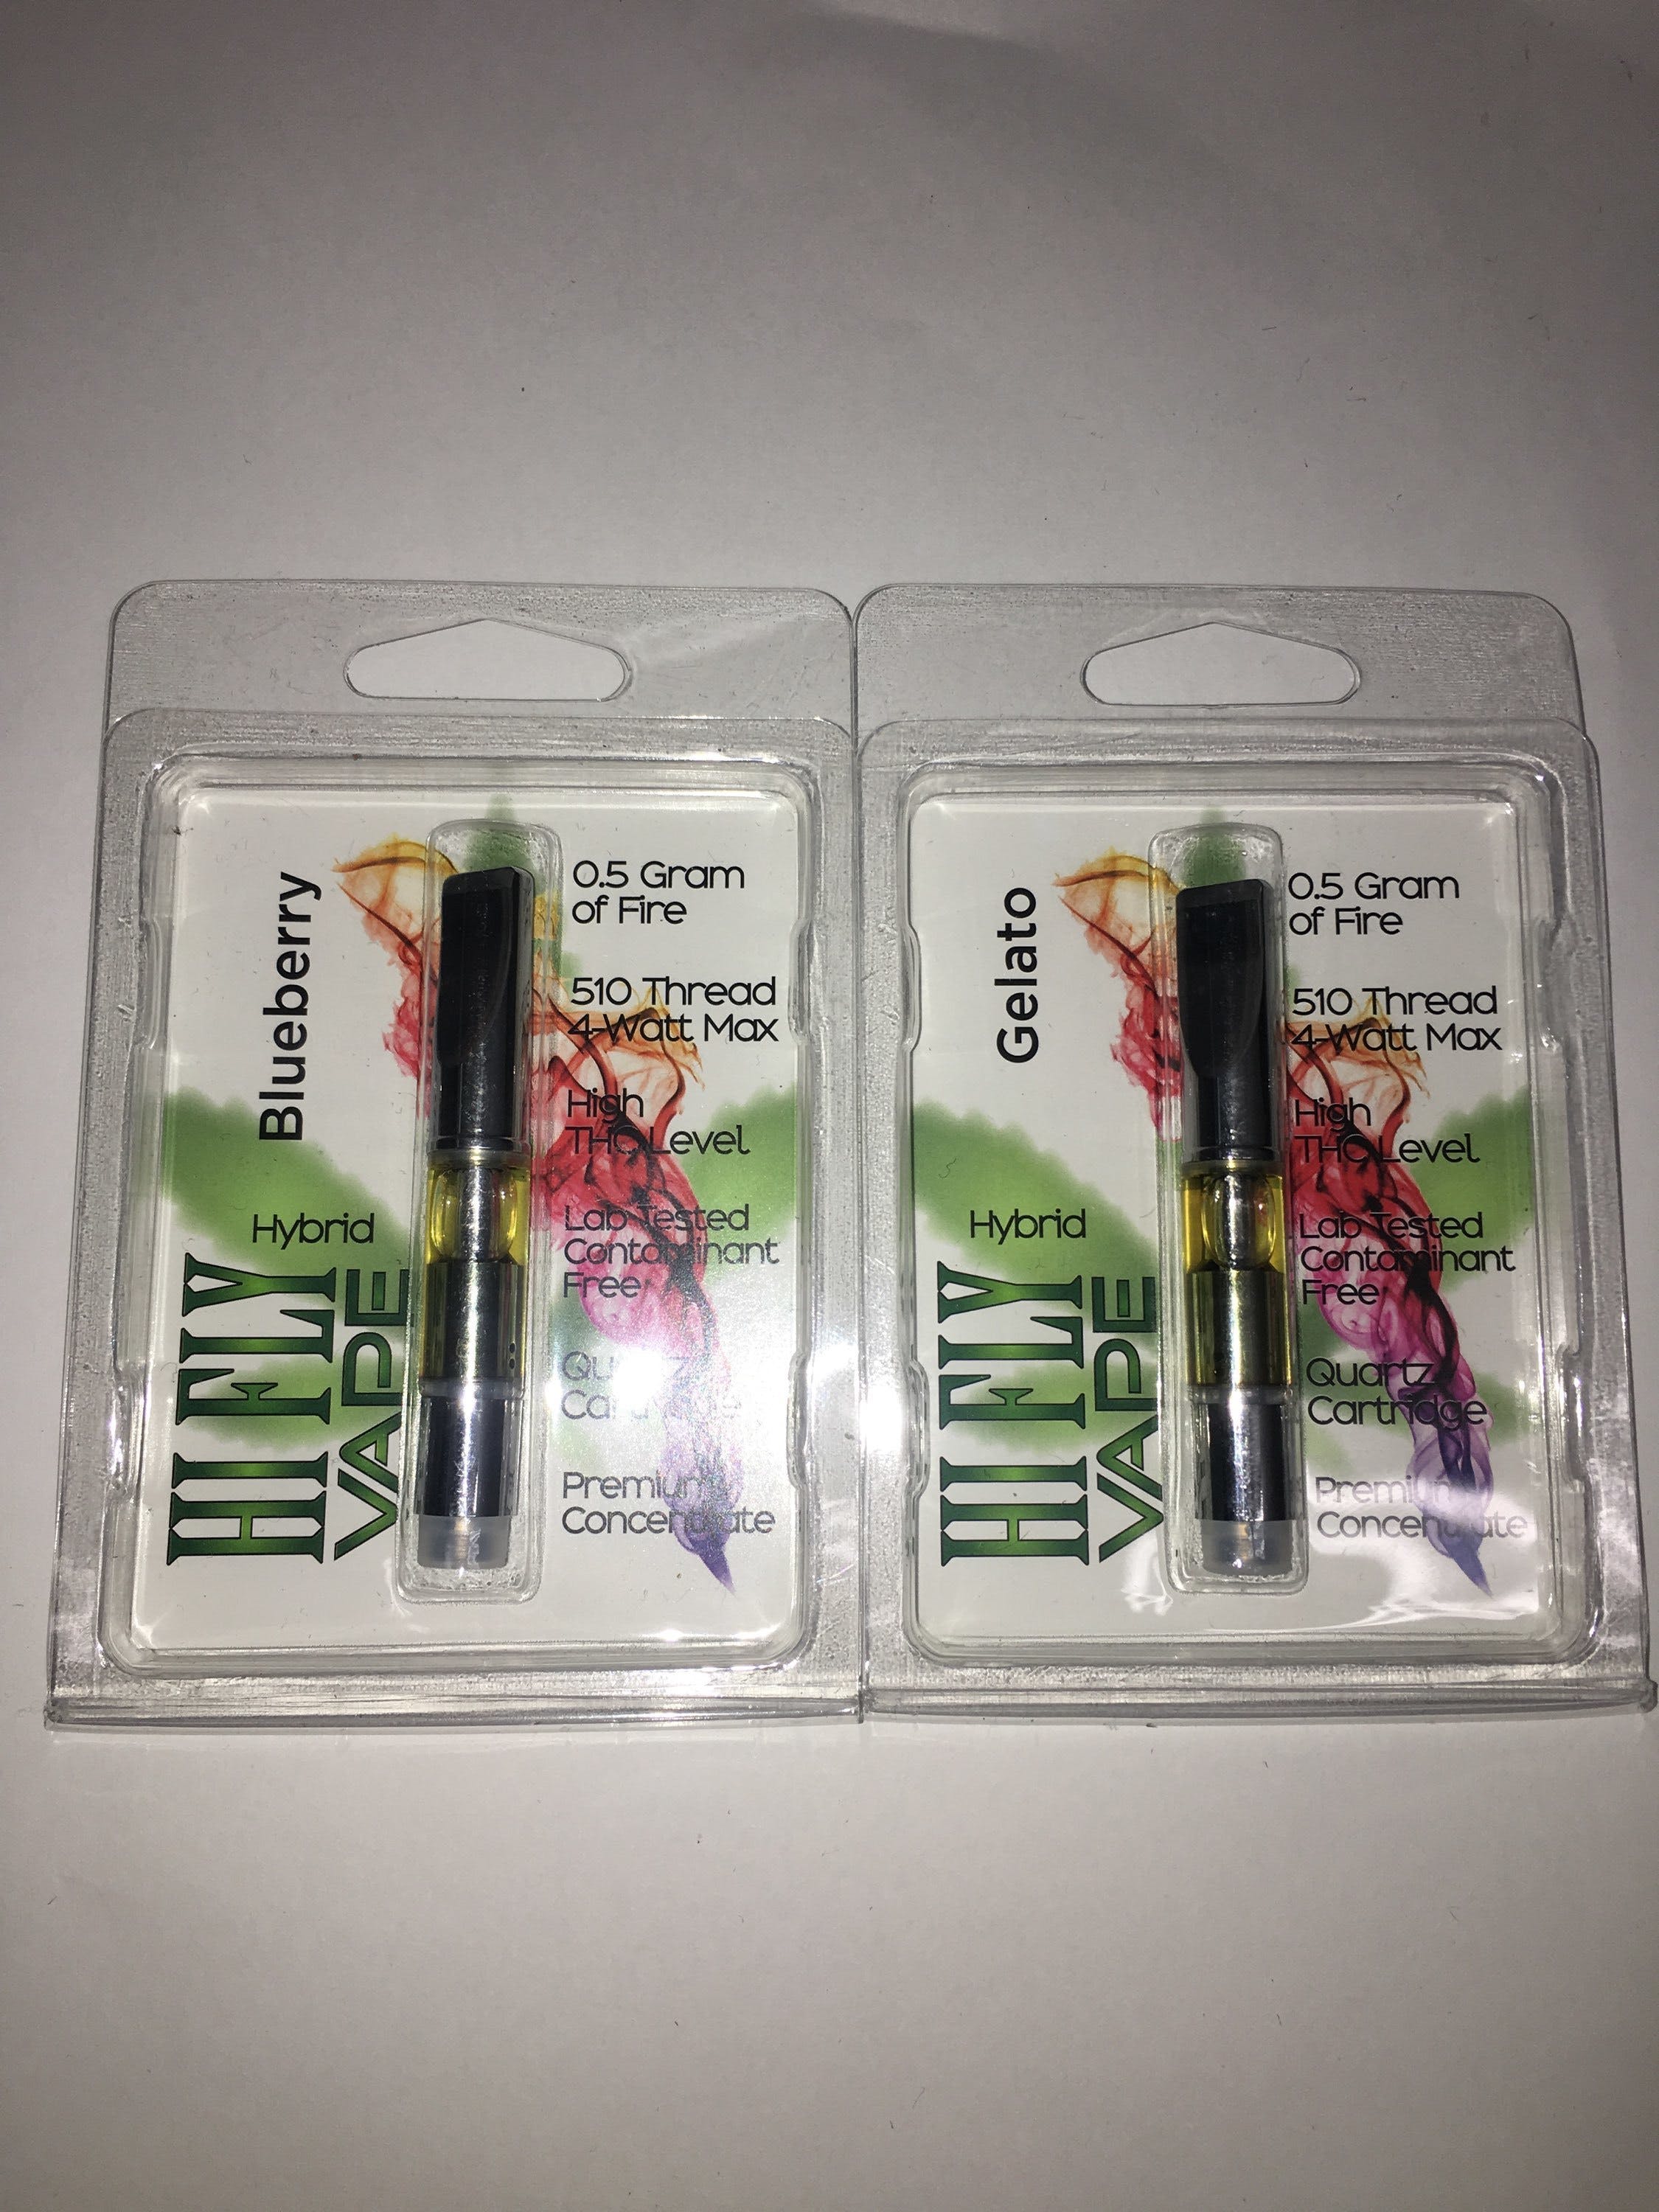 concentrate-hyfly-cartridge-half-gram